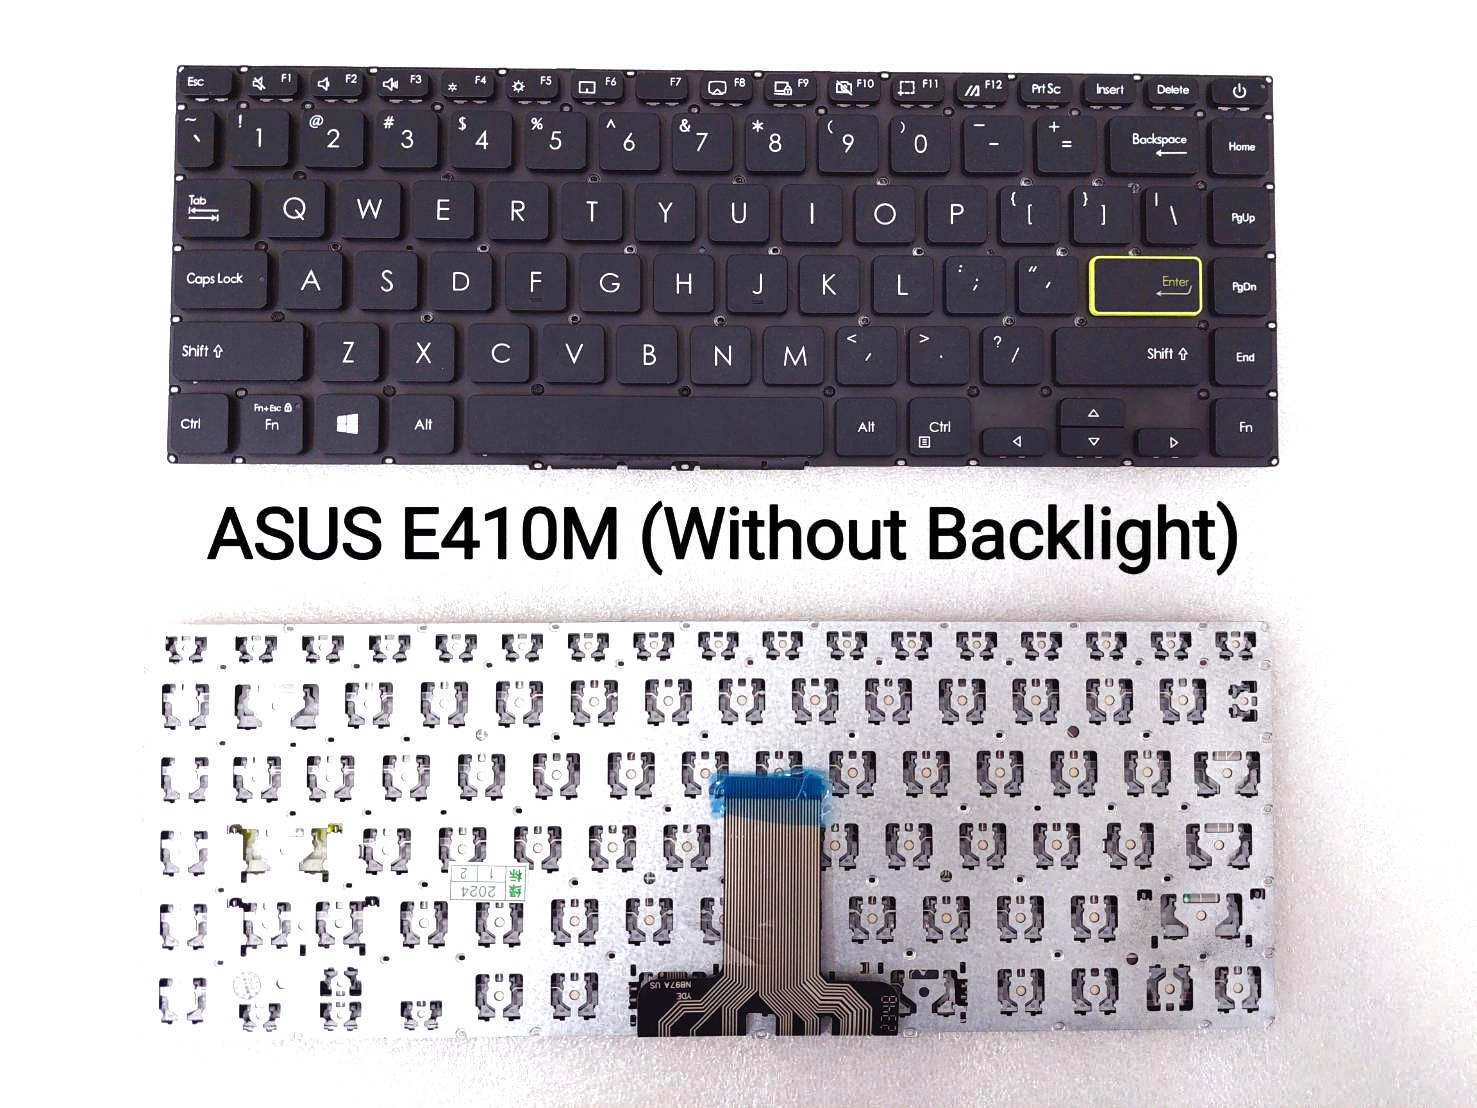 ASUS E410M (Without Backlight)